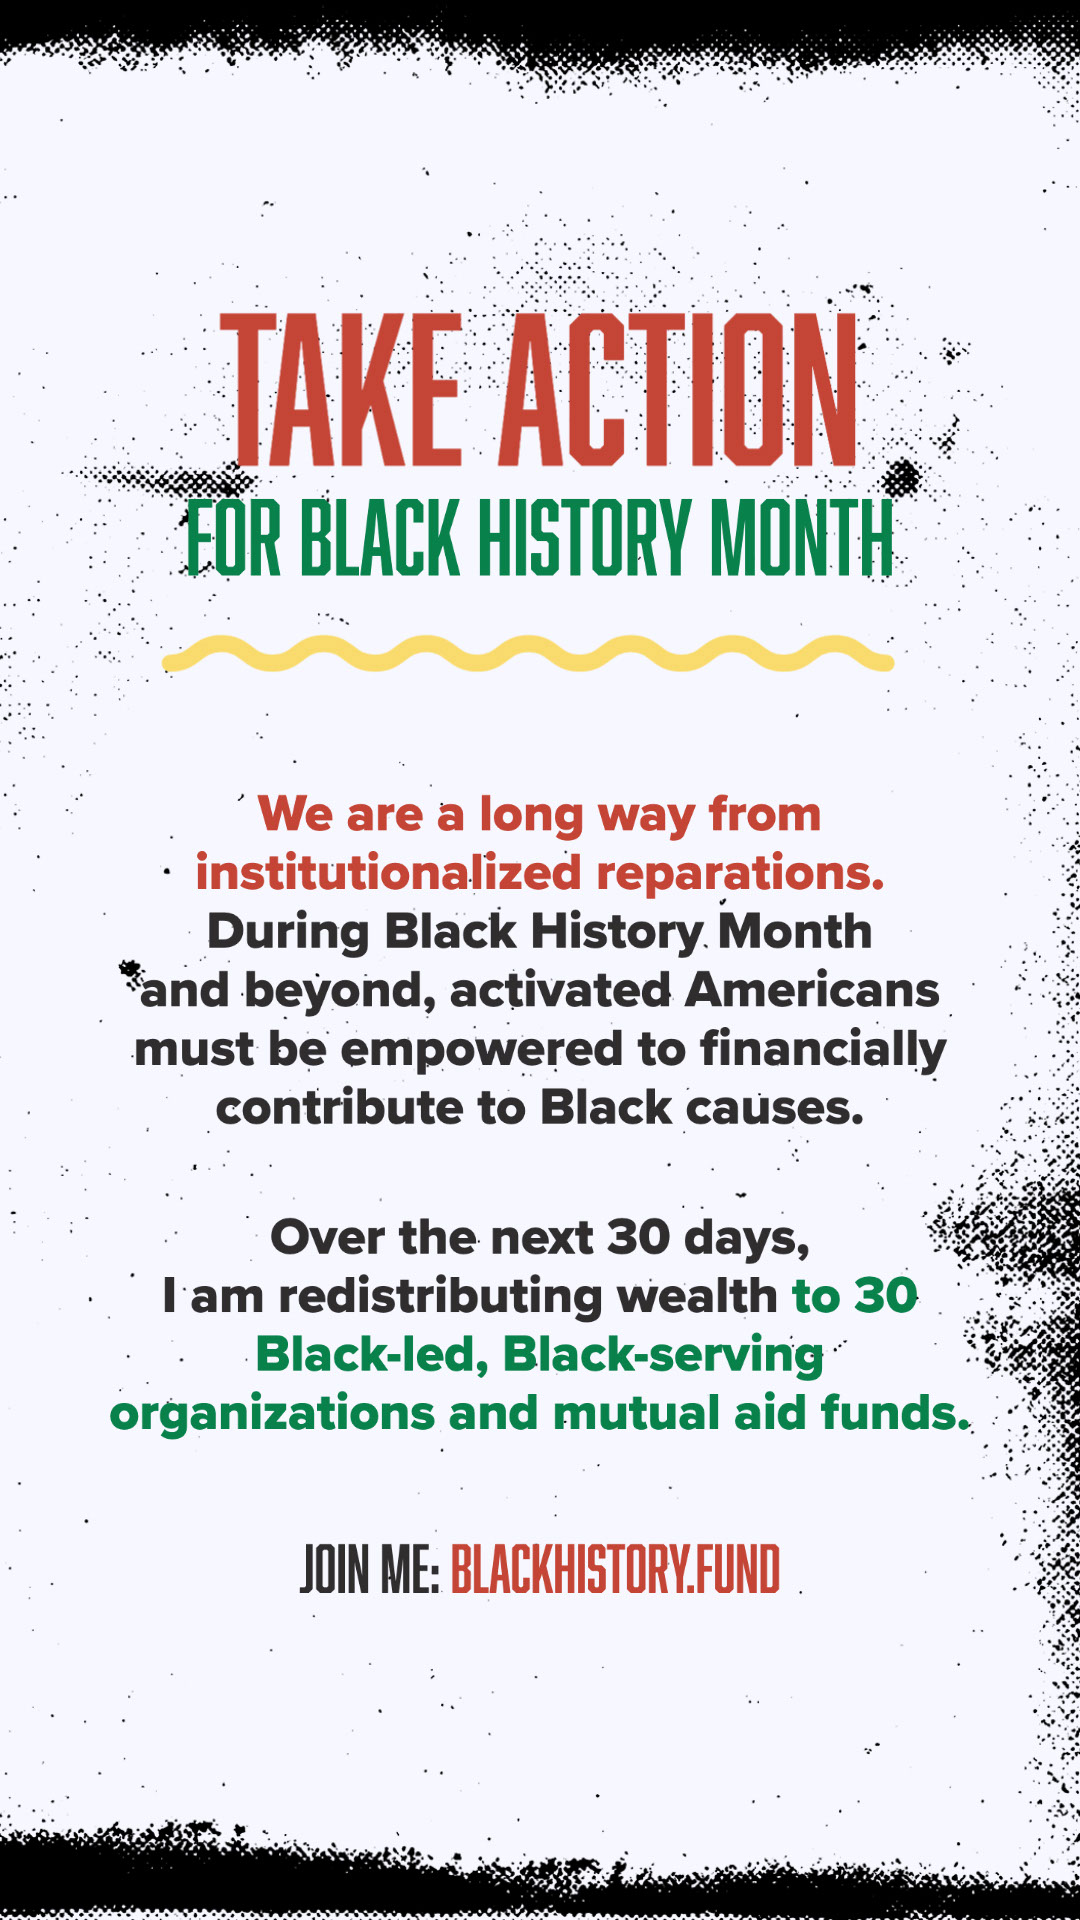 blackhistory.fund TAKE ACTION FOR BLACK HISTORY MONTH JOIN ME: BLACKHISTORY.FUND We are a long way from institutionalized reparations. During Black History Month and beyond, activated Americans must be empowered to financially contribute to Black causes. Over the next 30 days, I am redistributing wealth to 30 Black-led, Black-serving organizations and mutual aid funds.